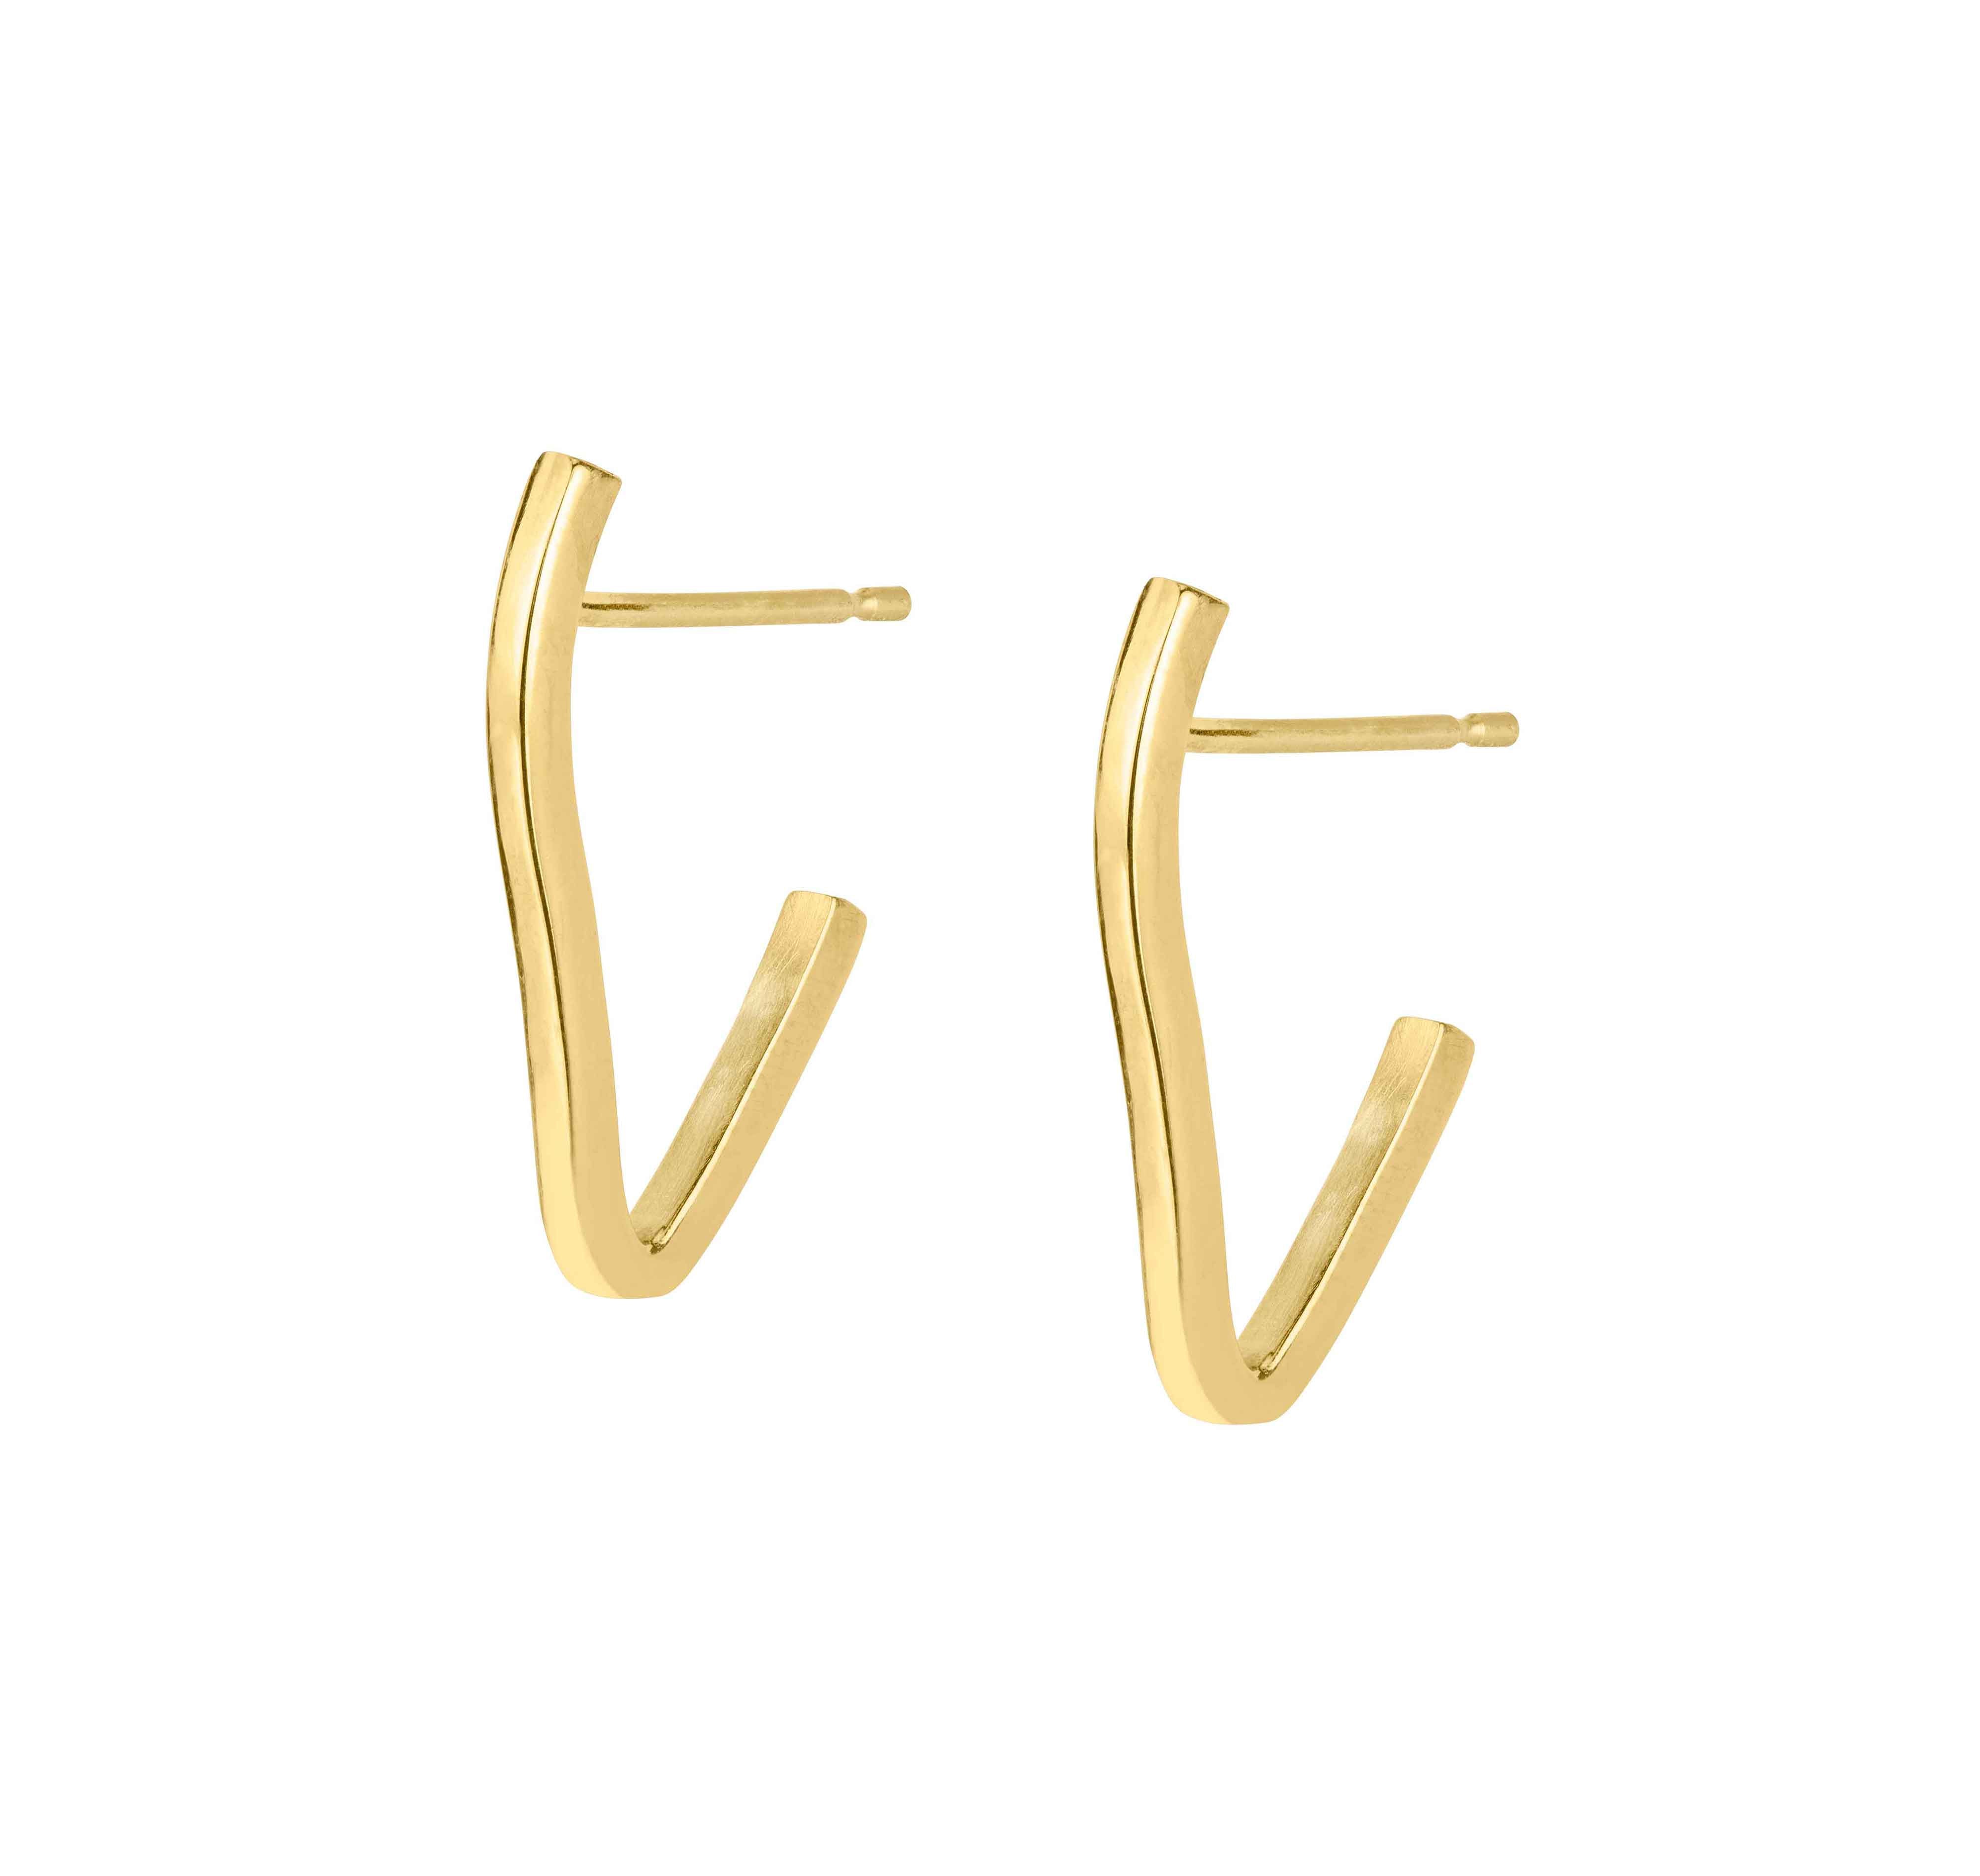 Curved Hoops